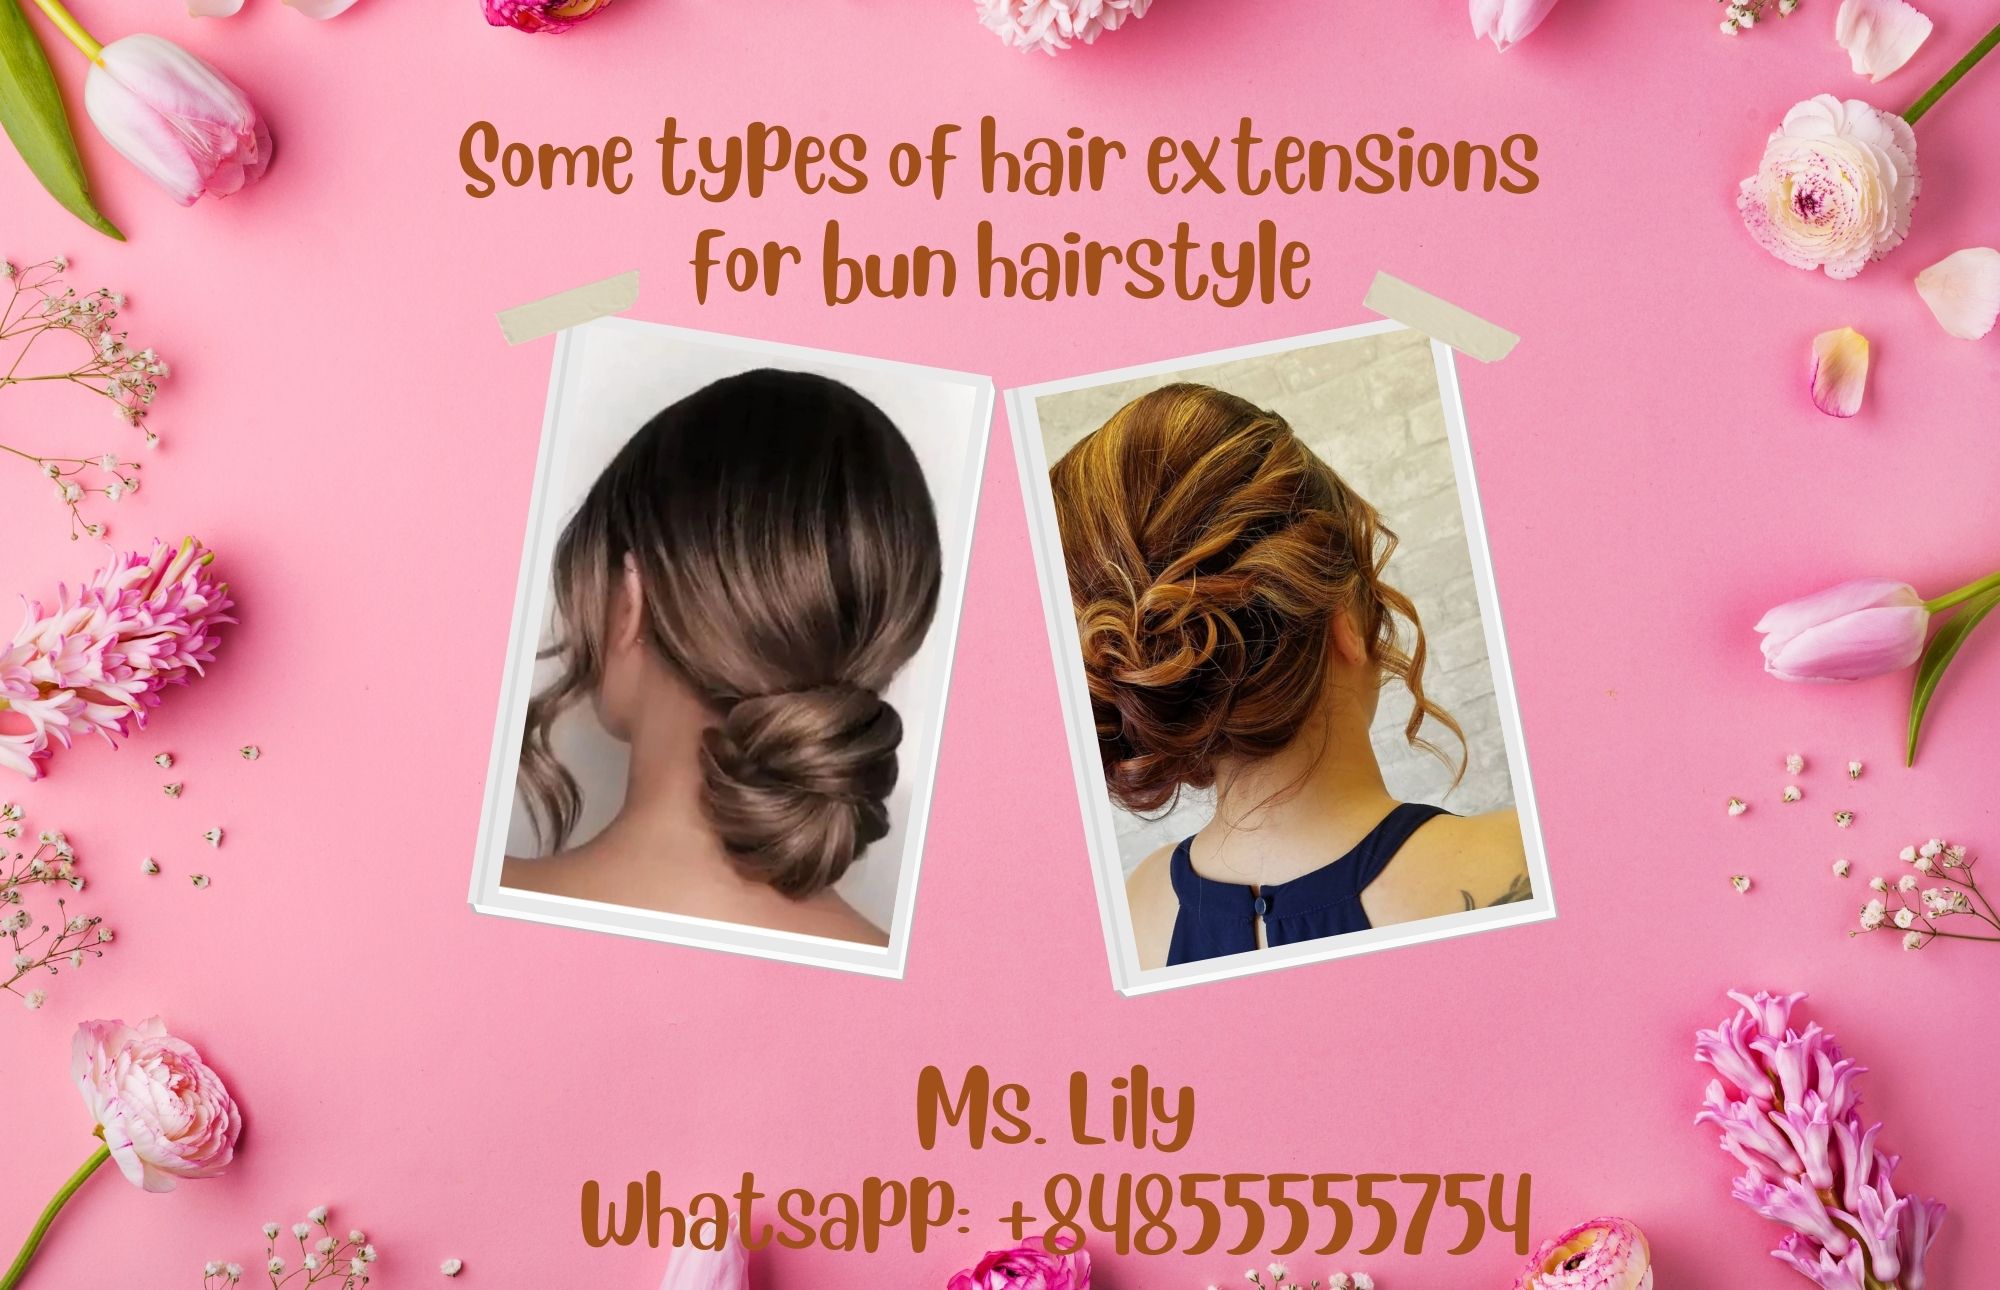 Some types of hair extensions for bun hairstyle